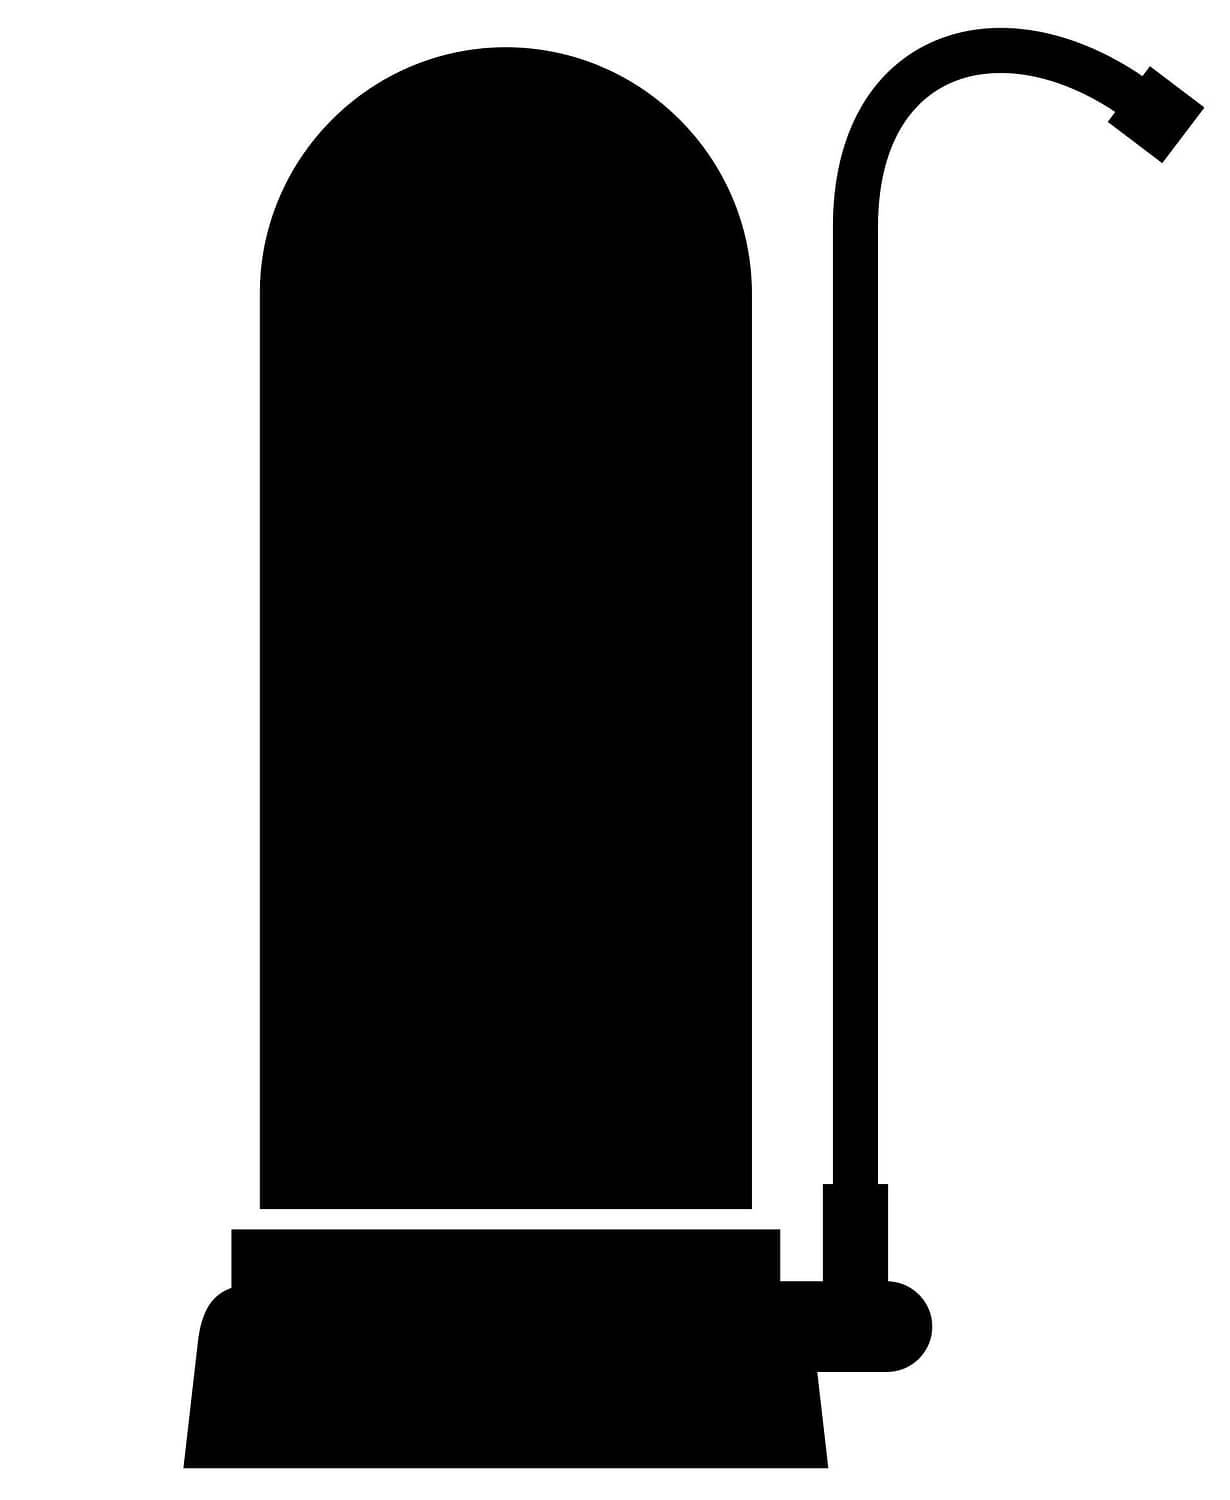 Black and white vector image of a faucet with water filter